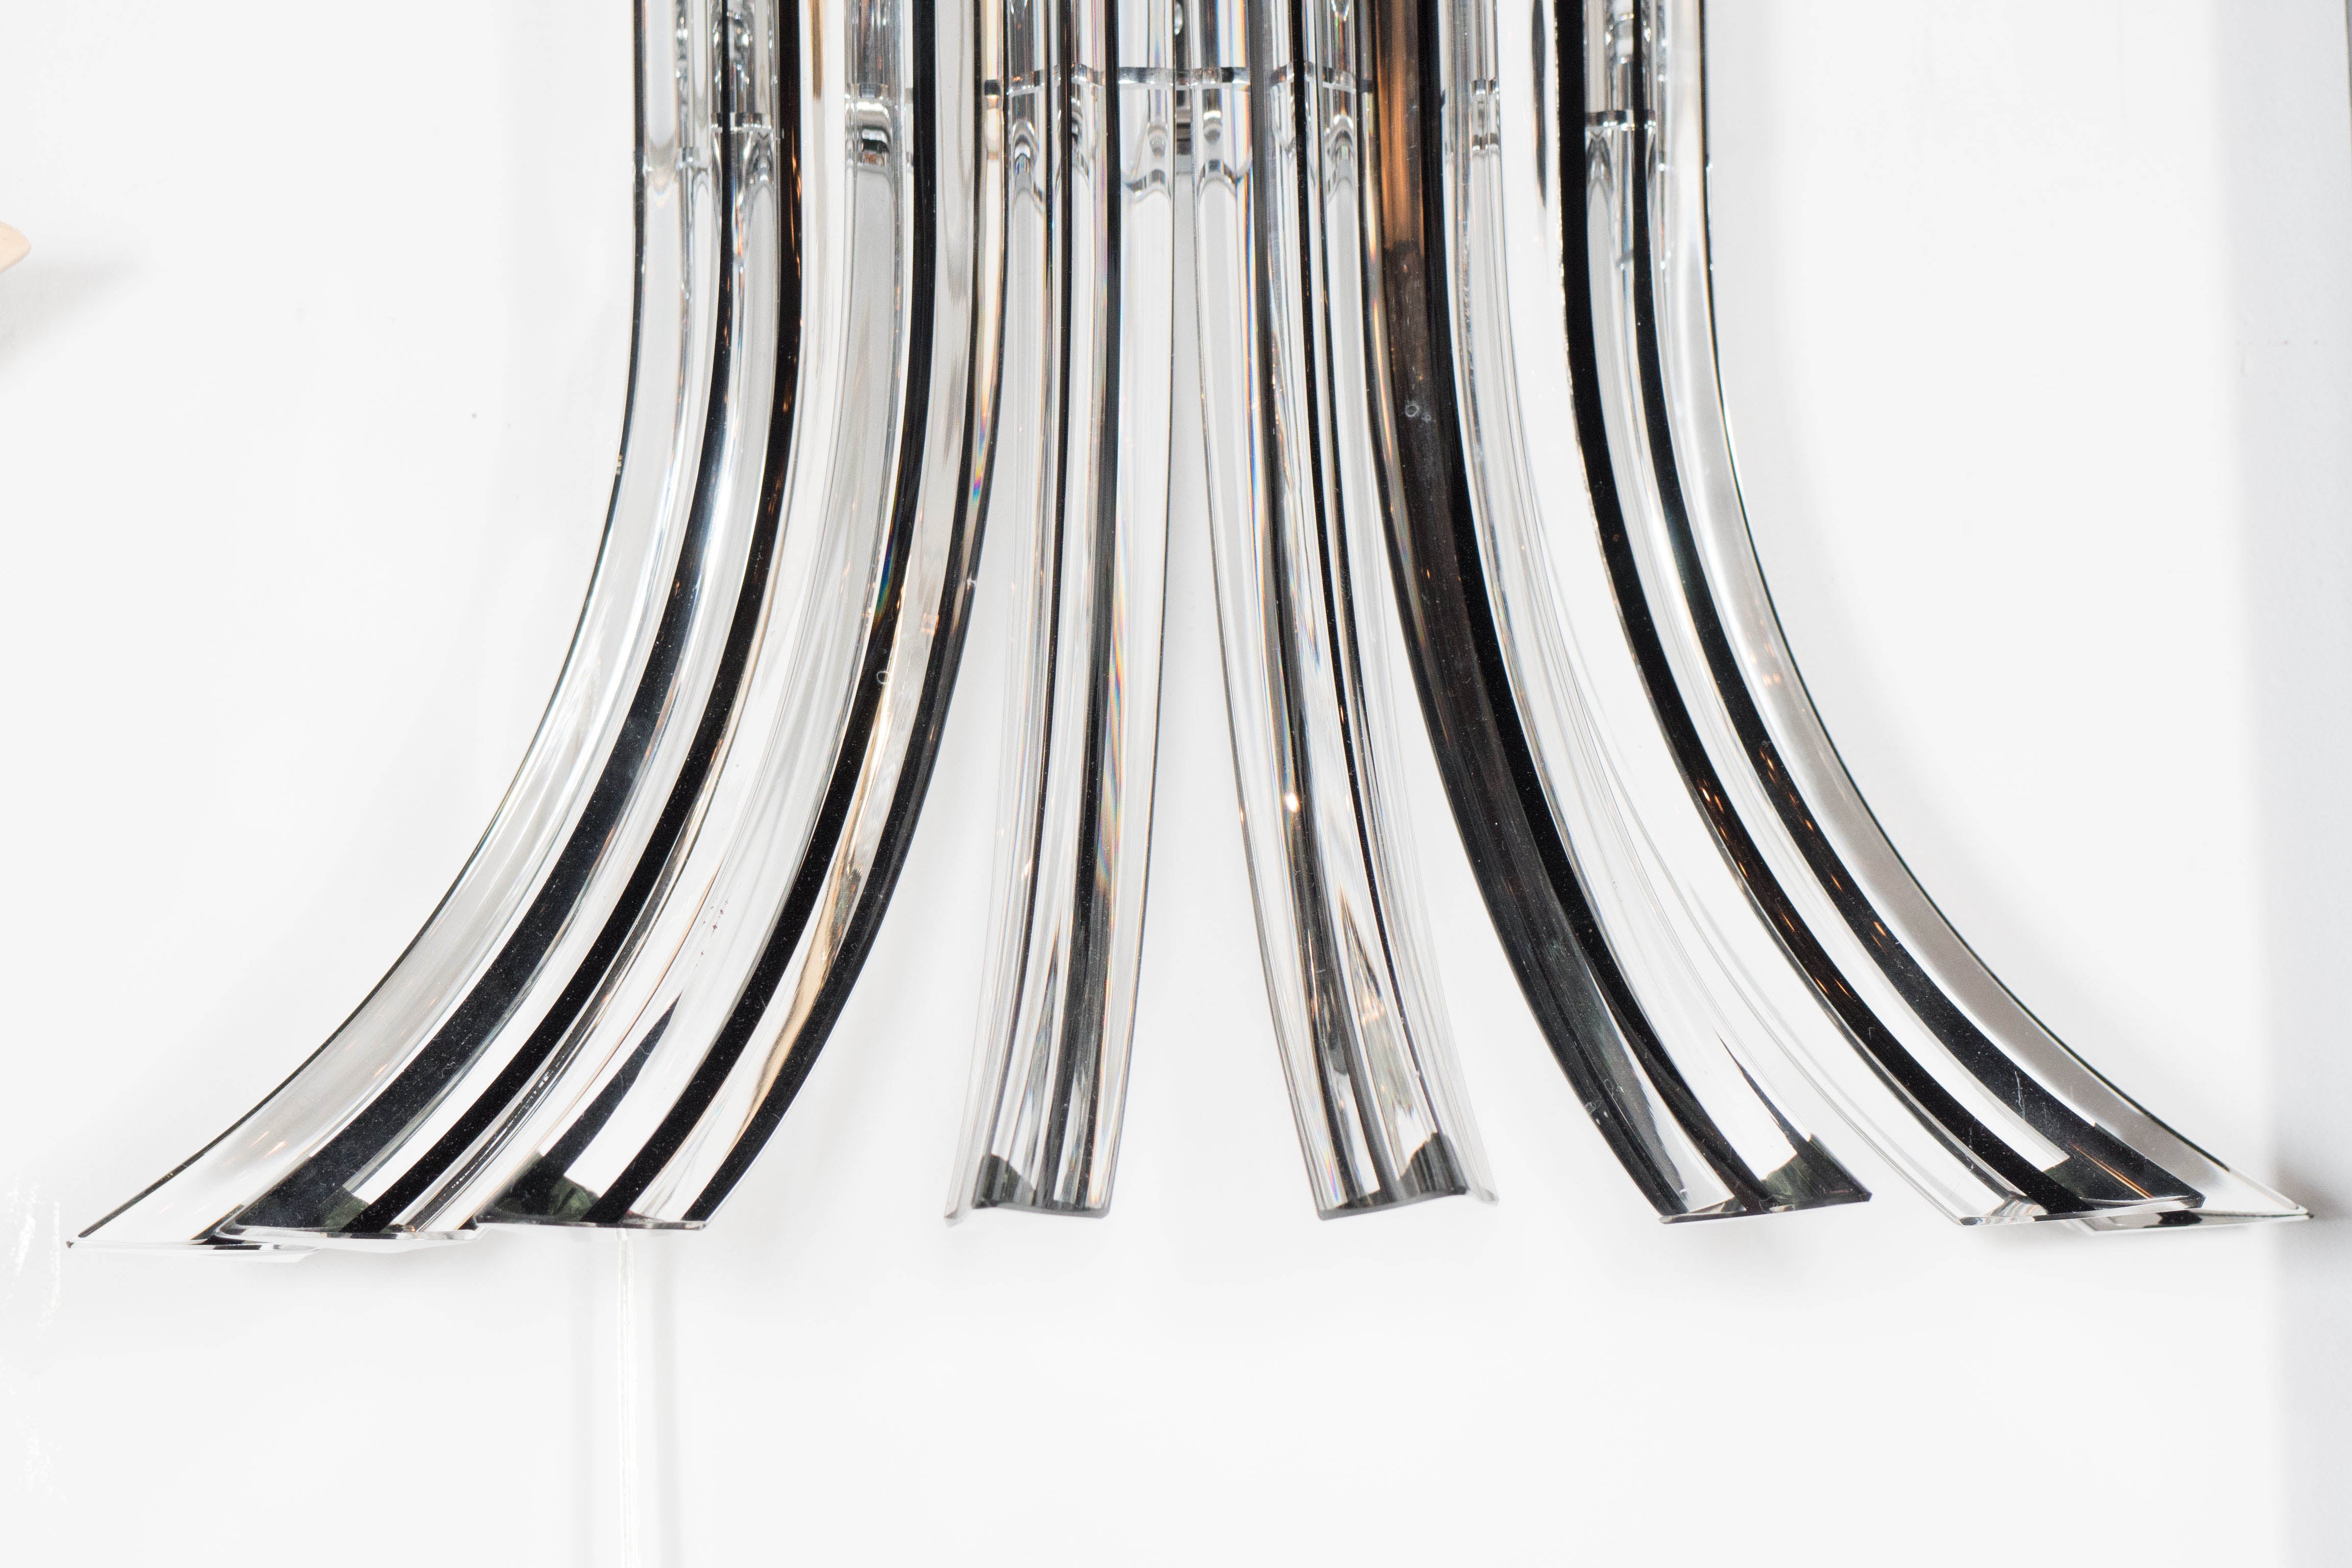 This outstanding pair of Modernist hand blown glass camer sconces were realized in Murano, Italy- the island off the coast of Venice renowned for centuries for its superlative glass production. The sleek pair of sconces are composed of eight curved